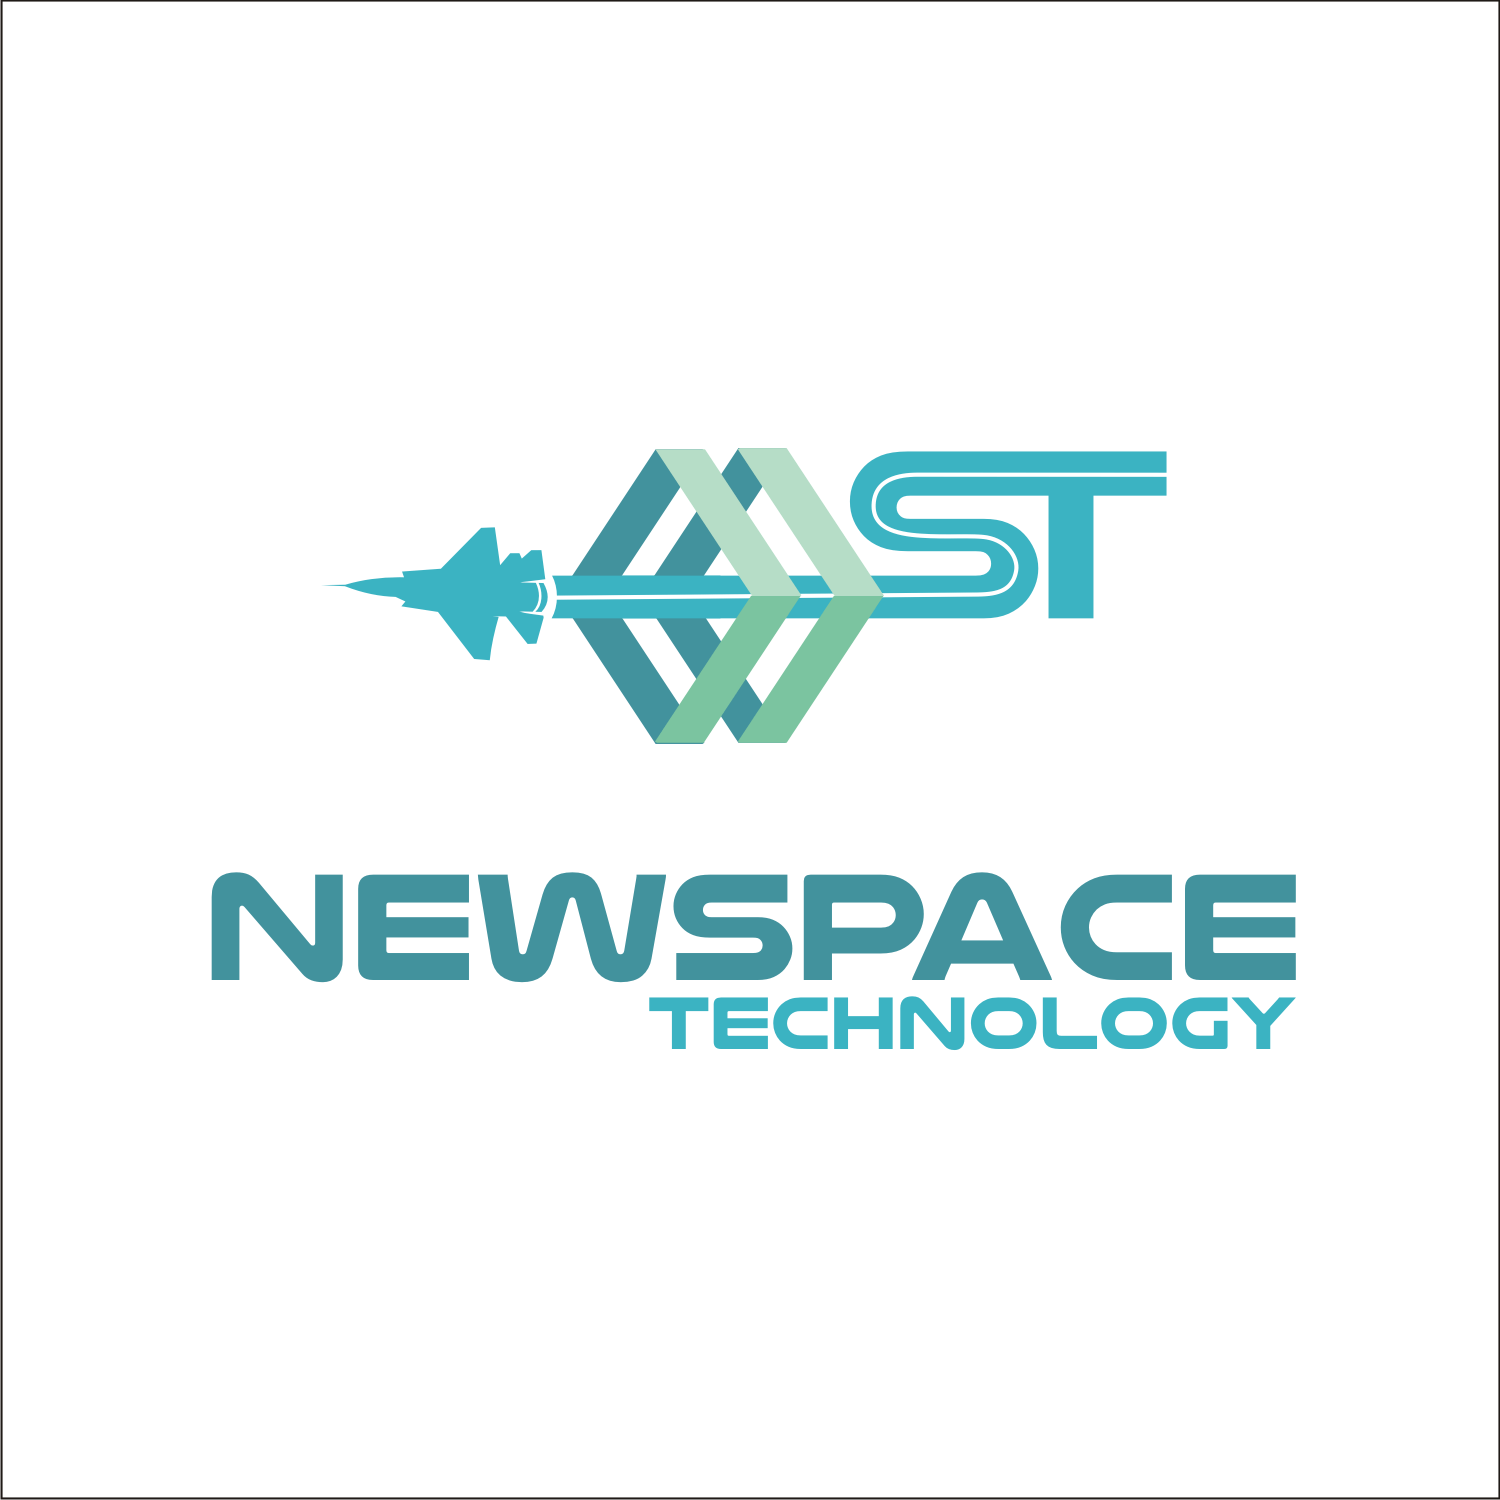 European Company Logo - Playful, Modern, It Company Logo Design for NEW SPACE TECHNOLOGY by ...